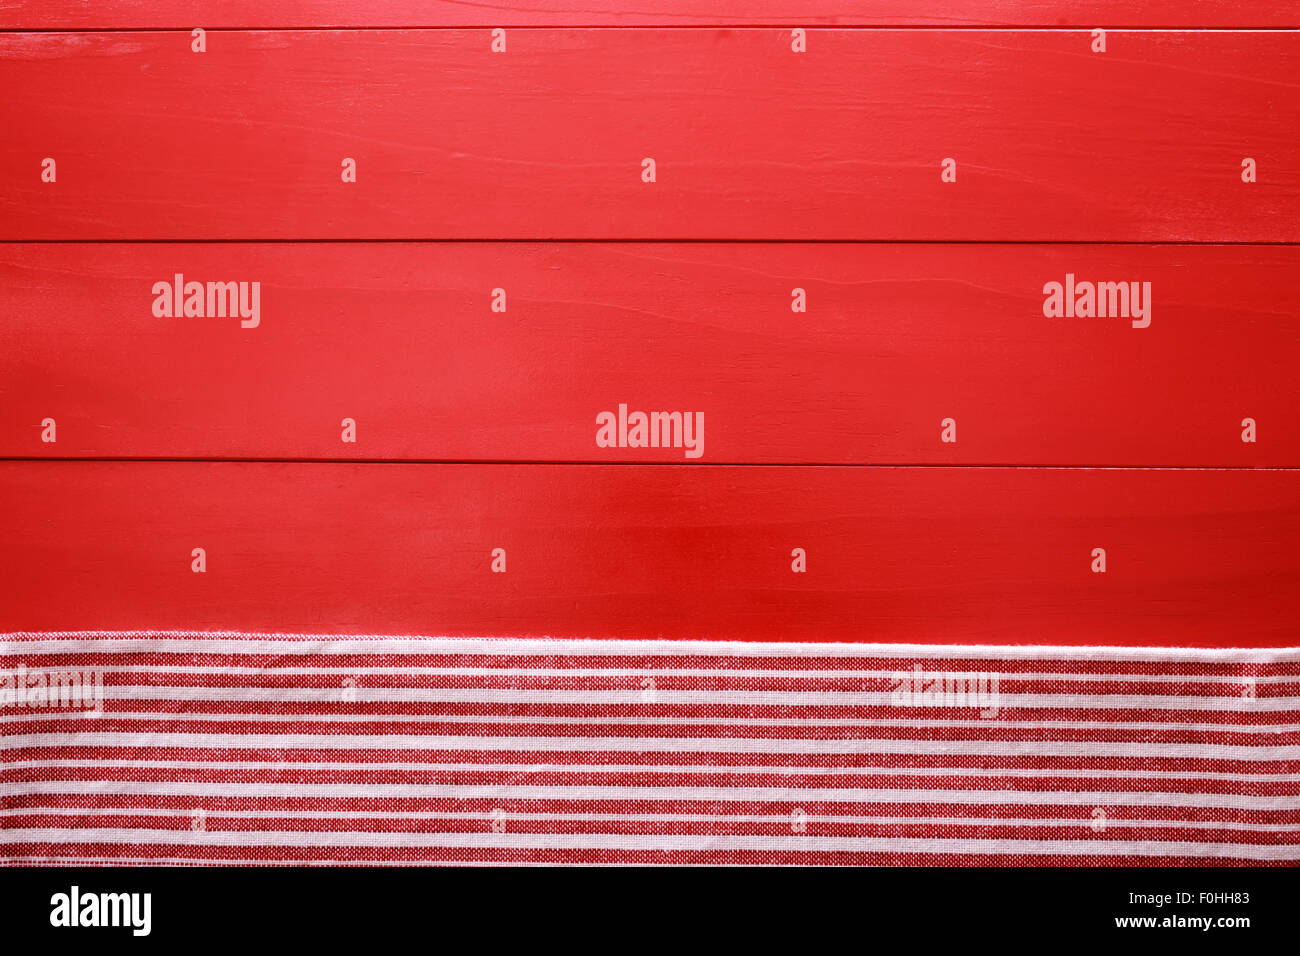 Blank red wooden boards with napkin aligned horizontally Stock Photo